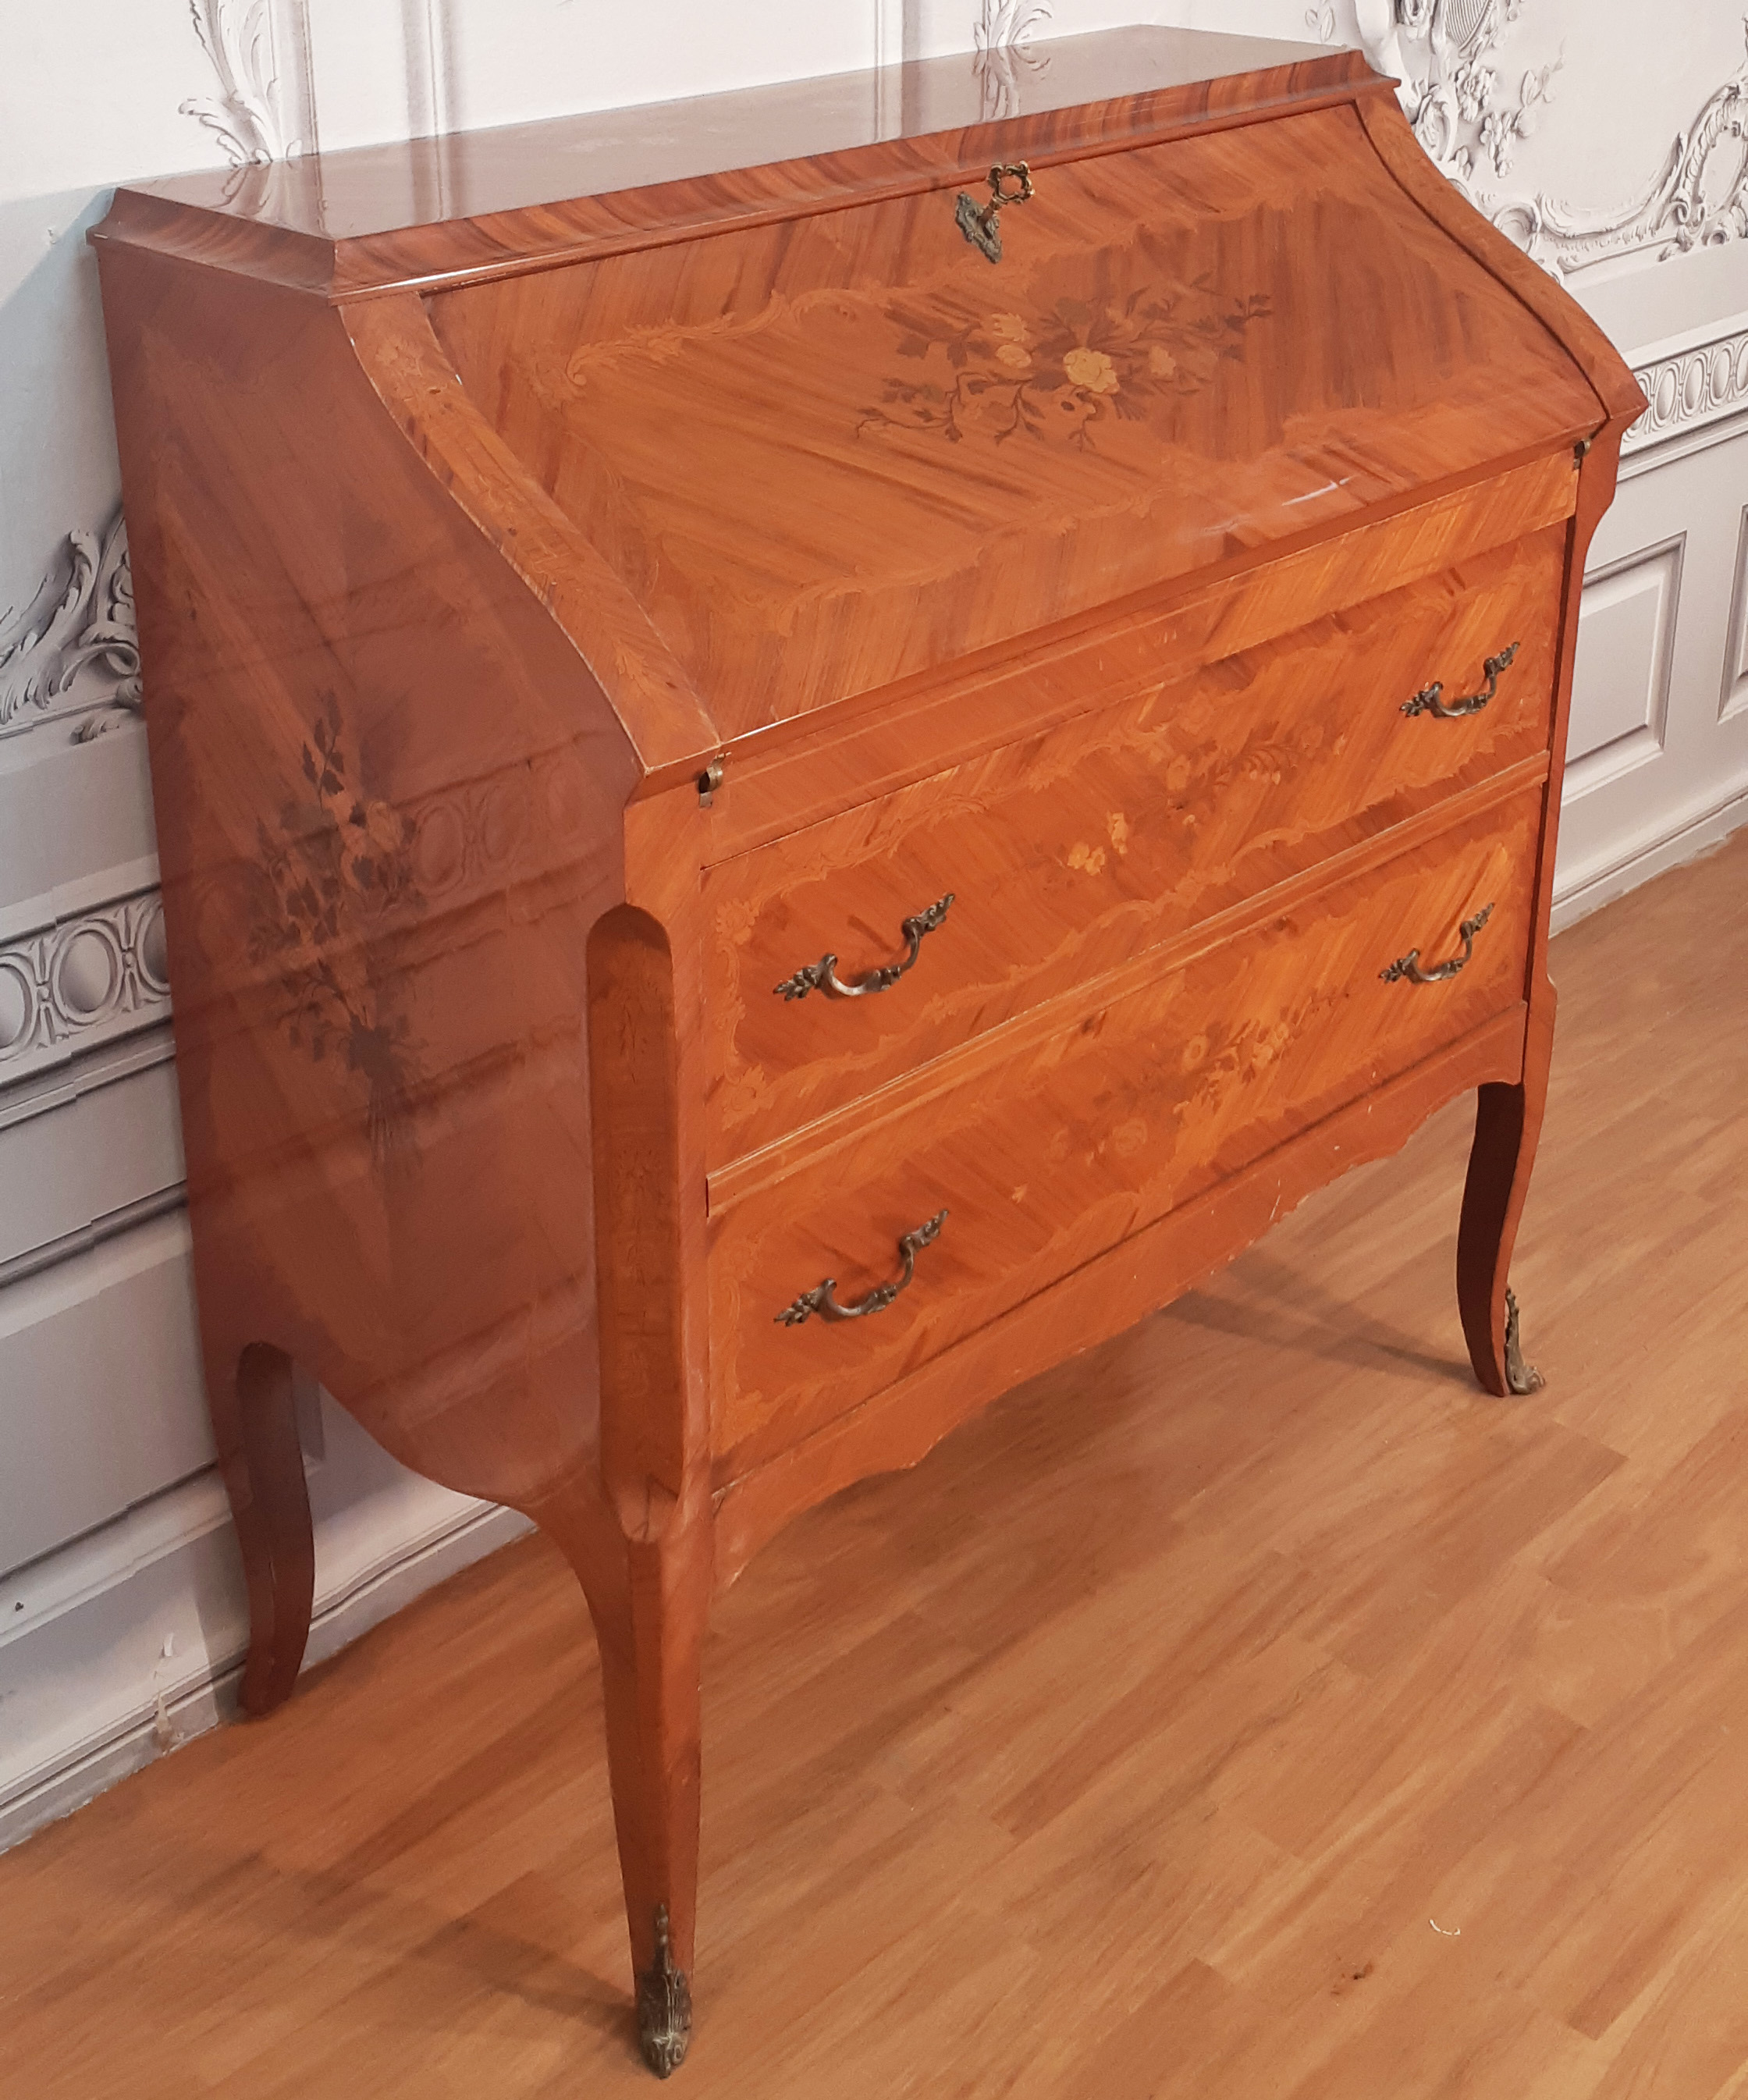 LOUIS XV STYLE MARQUETRY INLAID 35f3e5